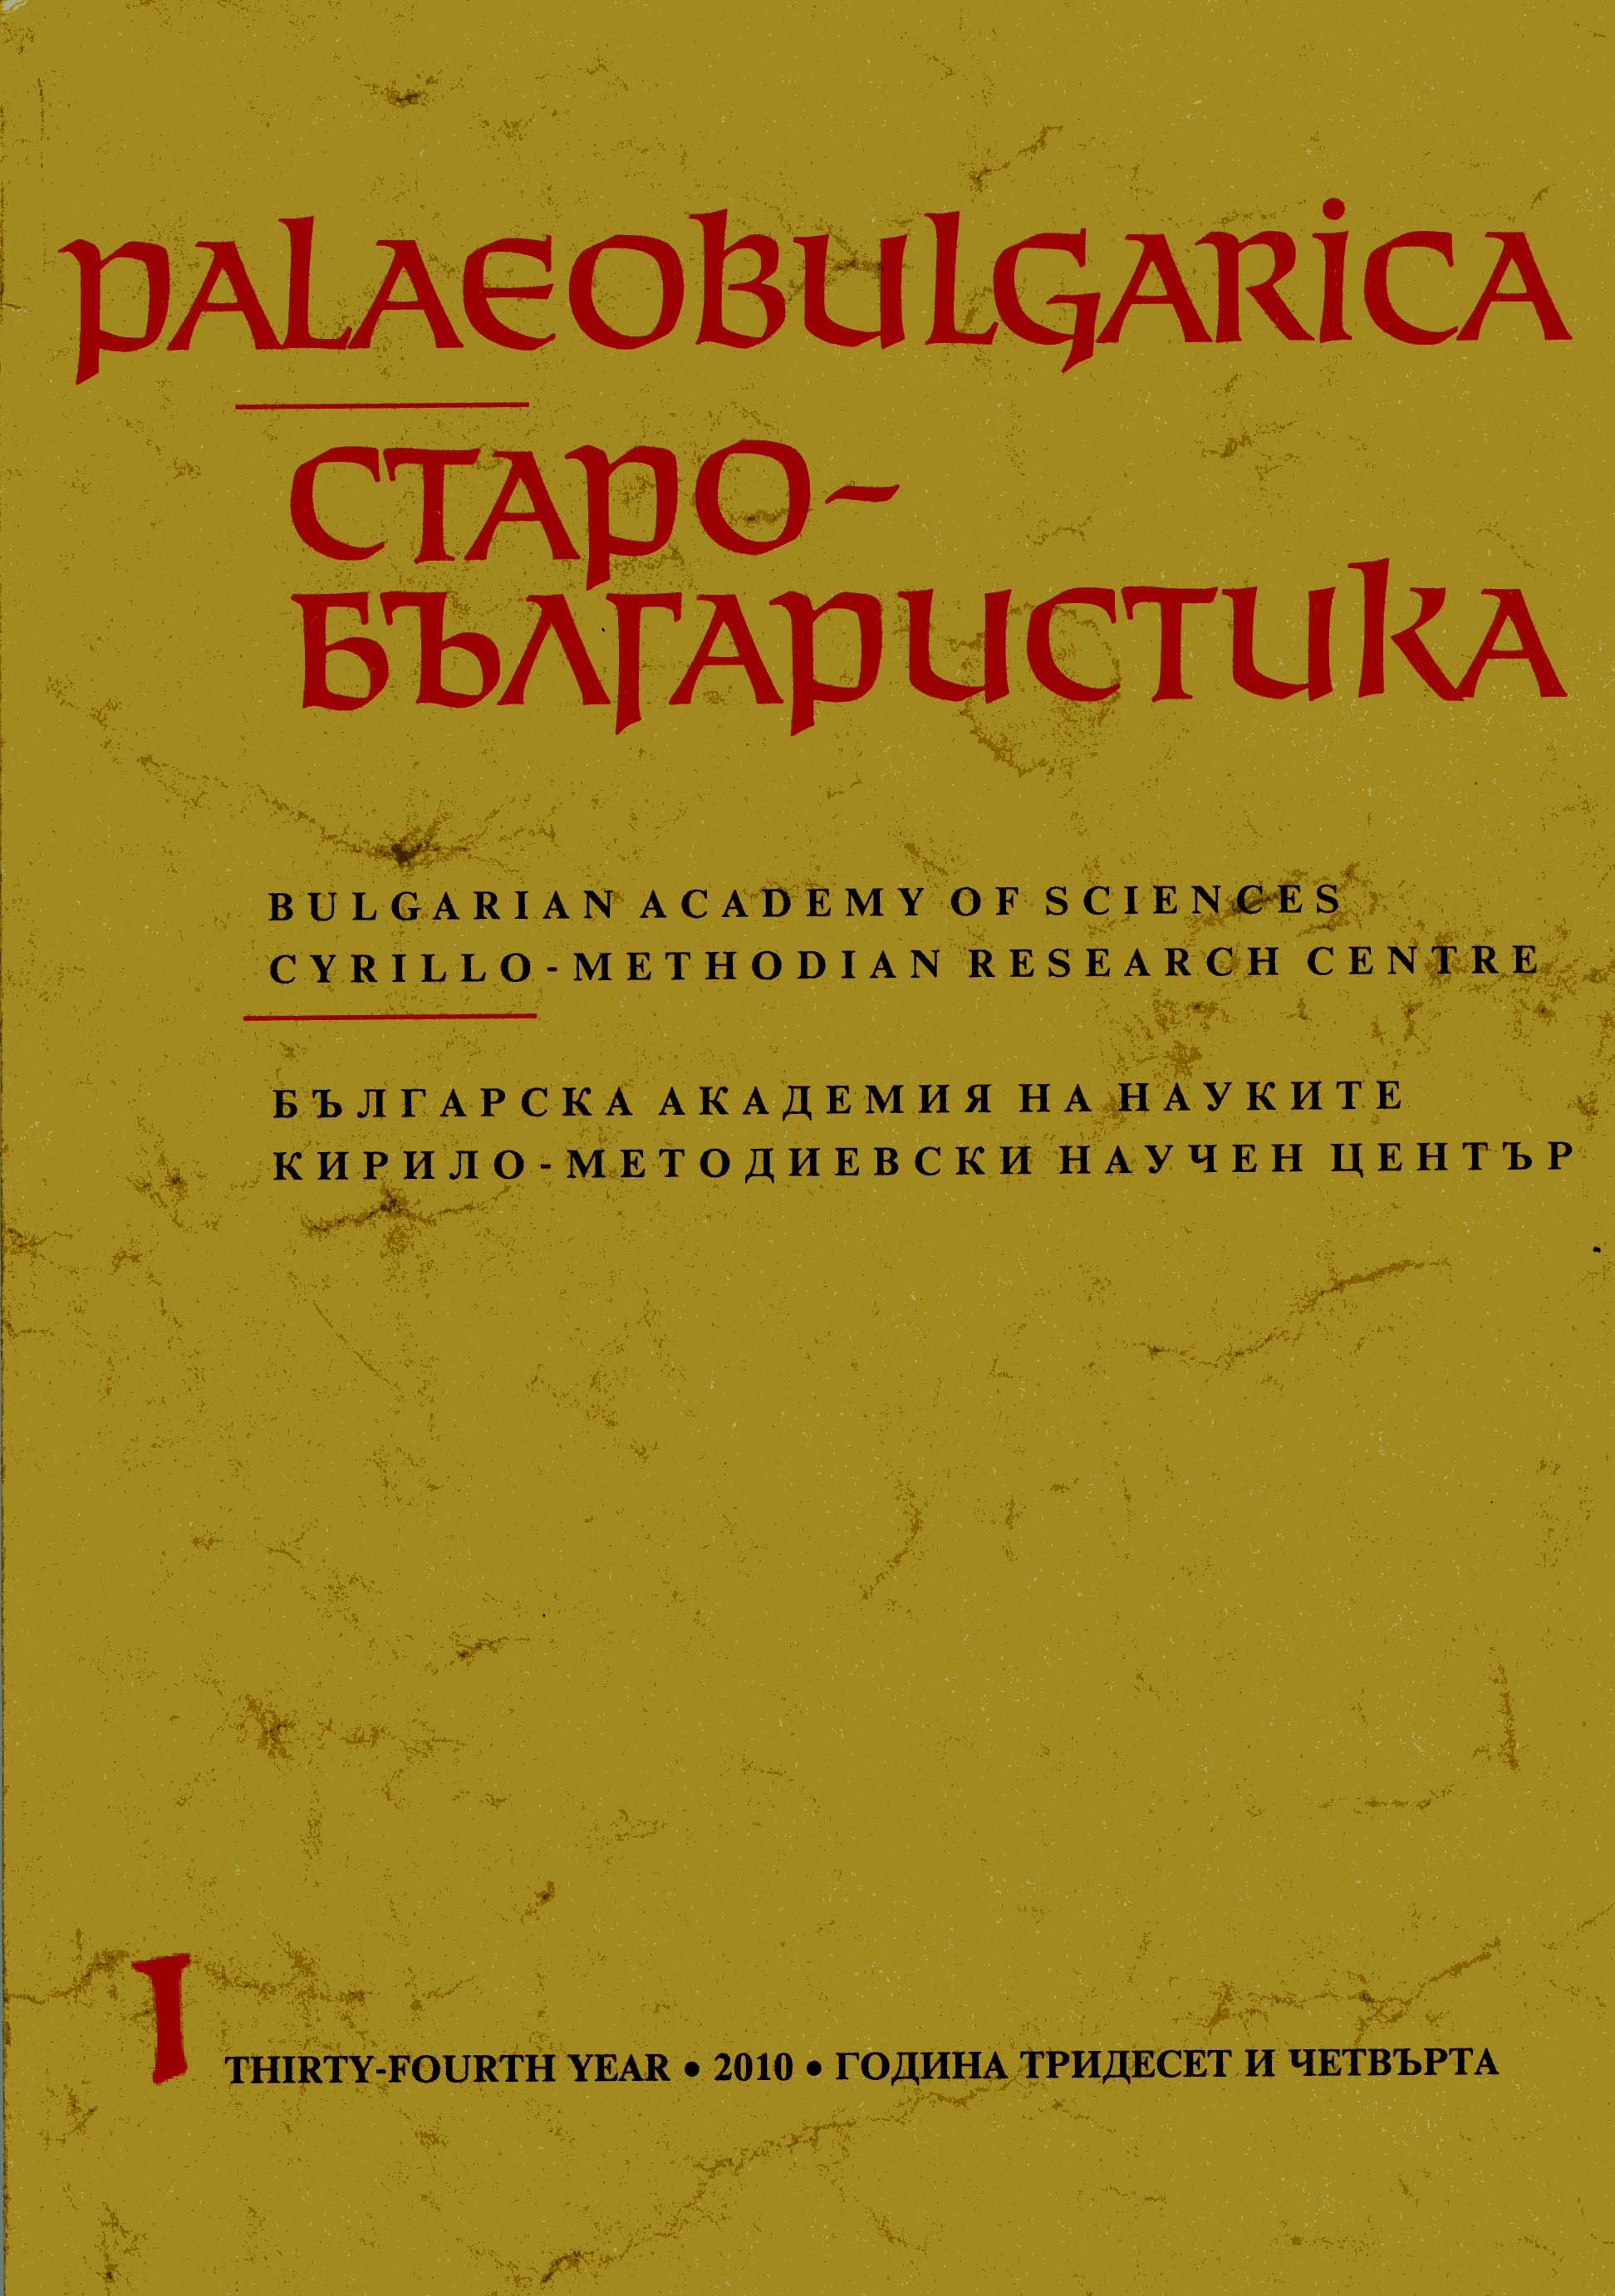 International Scholarly Conference “Contemporary Problems of Archeography”: On the Occasion of the Centenary of the Publishing of the First Volume of “Opisanie rukopisnogo otdelenija biblioteki Imperatorskoj akademii nauk” (Catalogue of the MS Sectio Cover Image